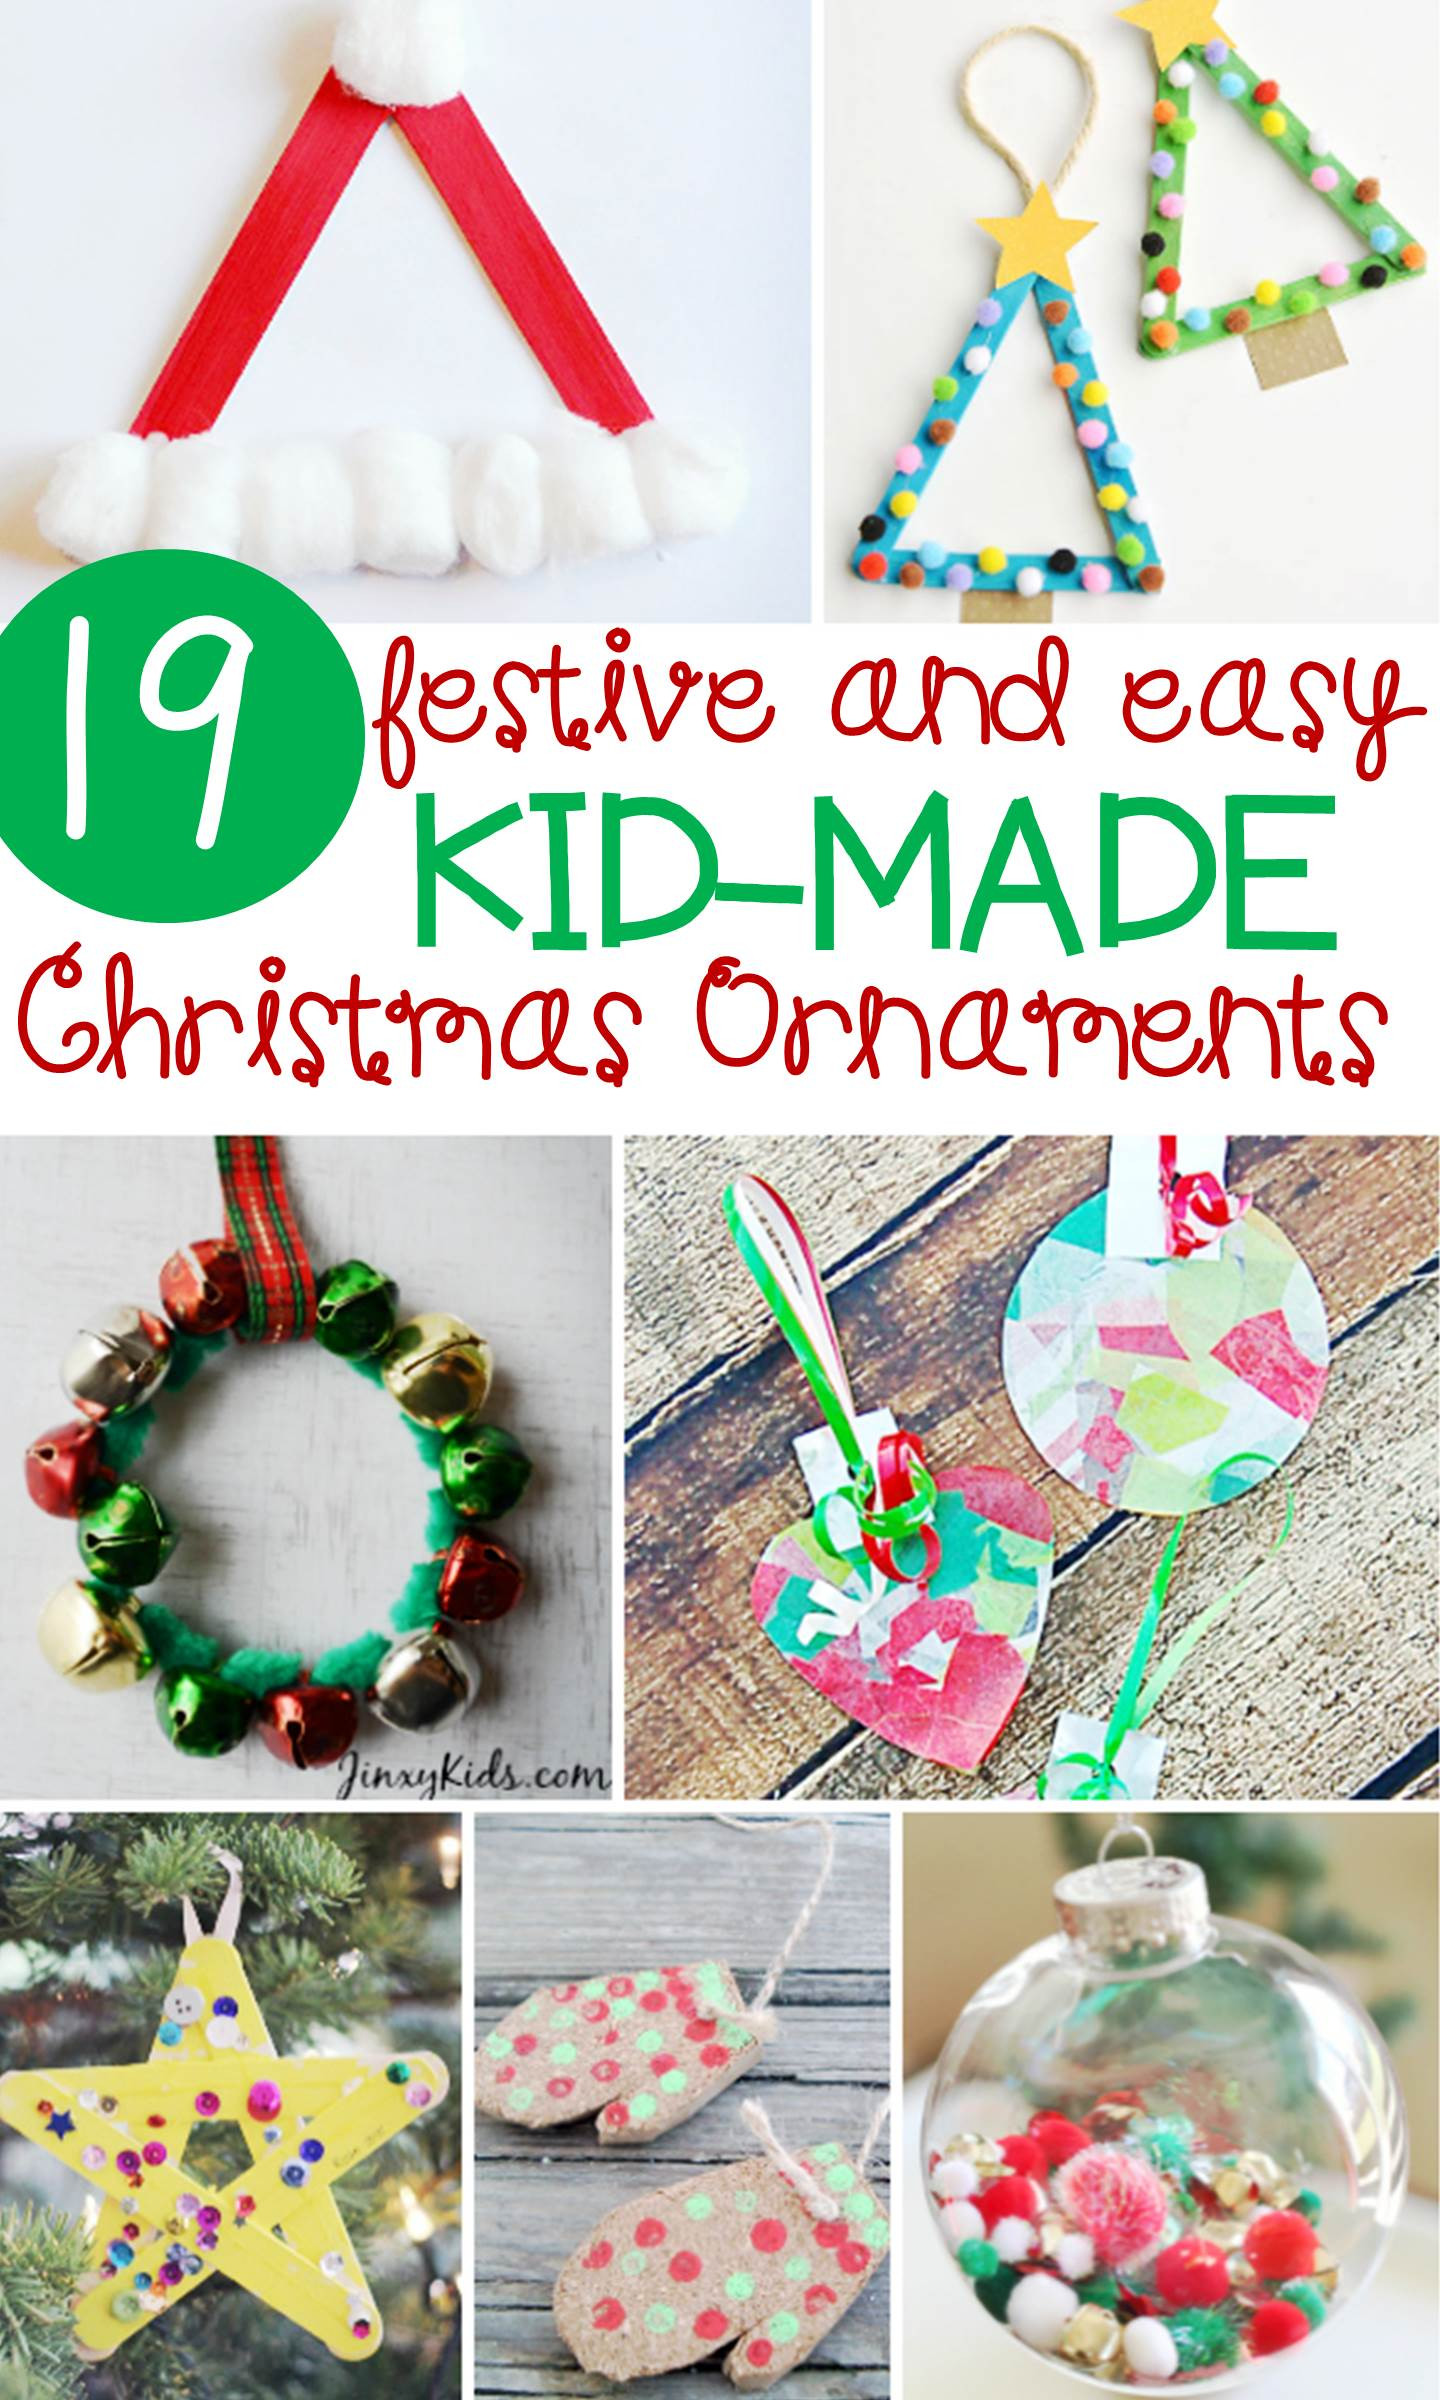 Christmas Crafts For Kids To Make
 Festive and Simple Kids Christmas Ornaments The